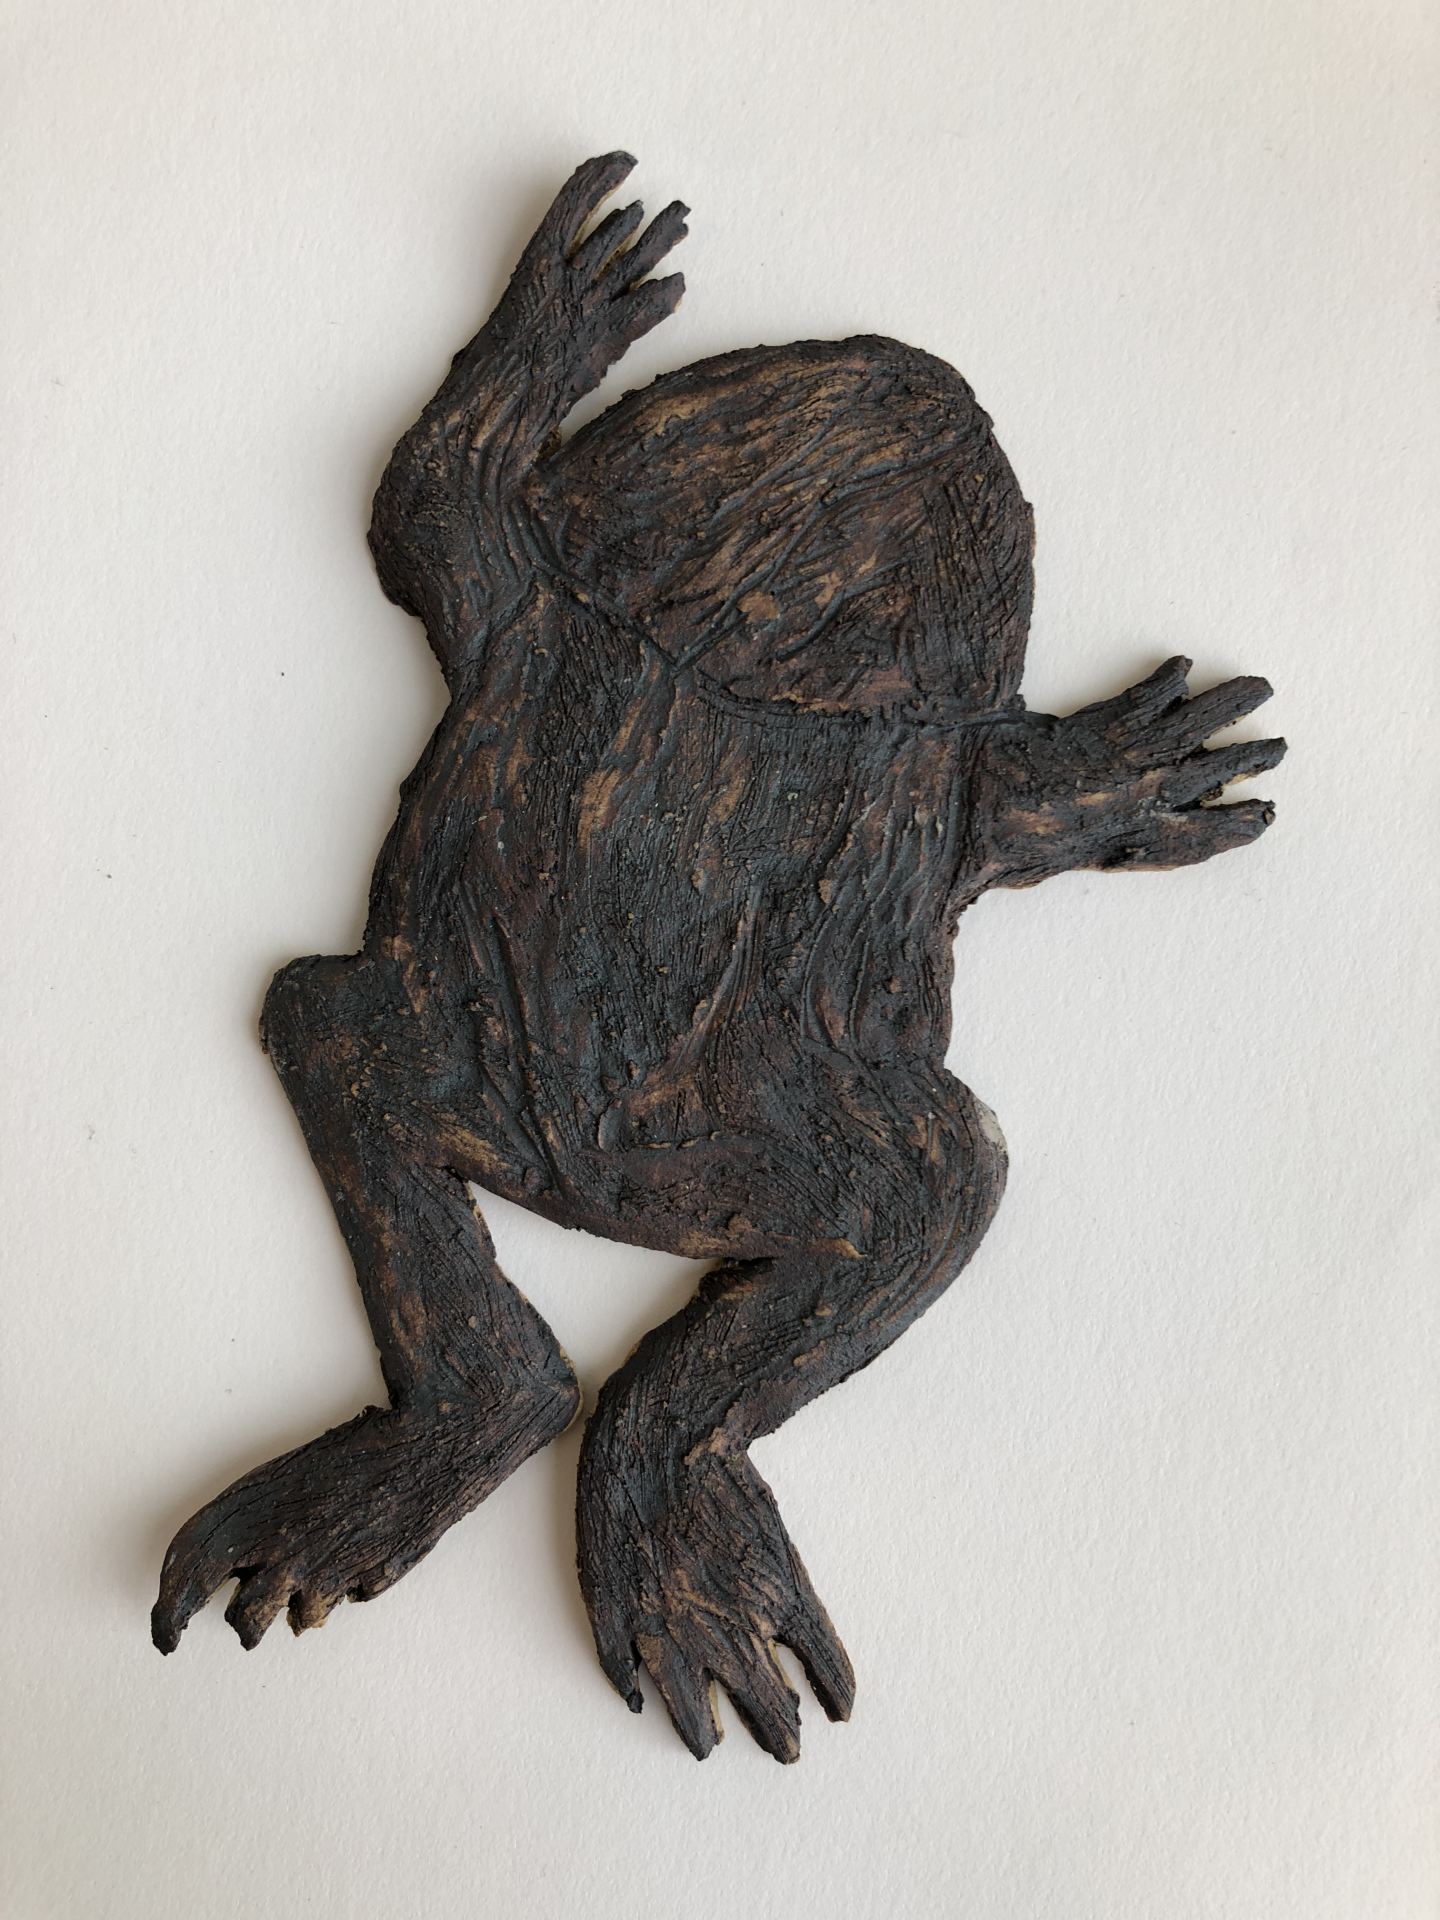 A brown  ceramic frog hangs on a wall.